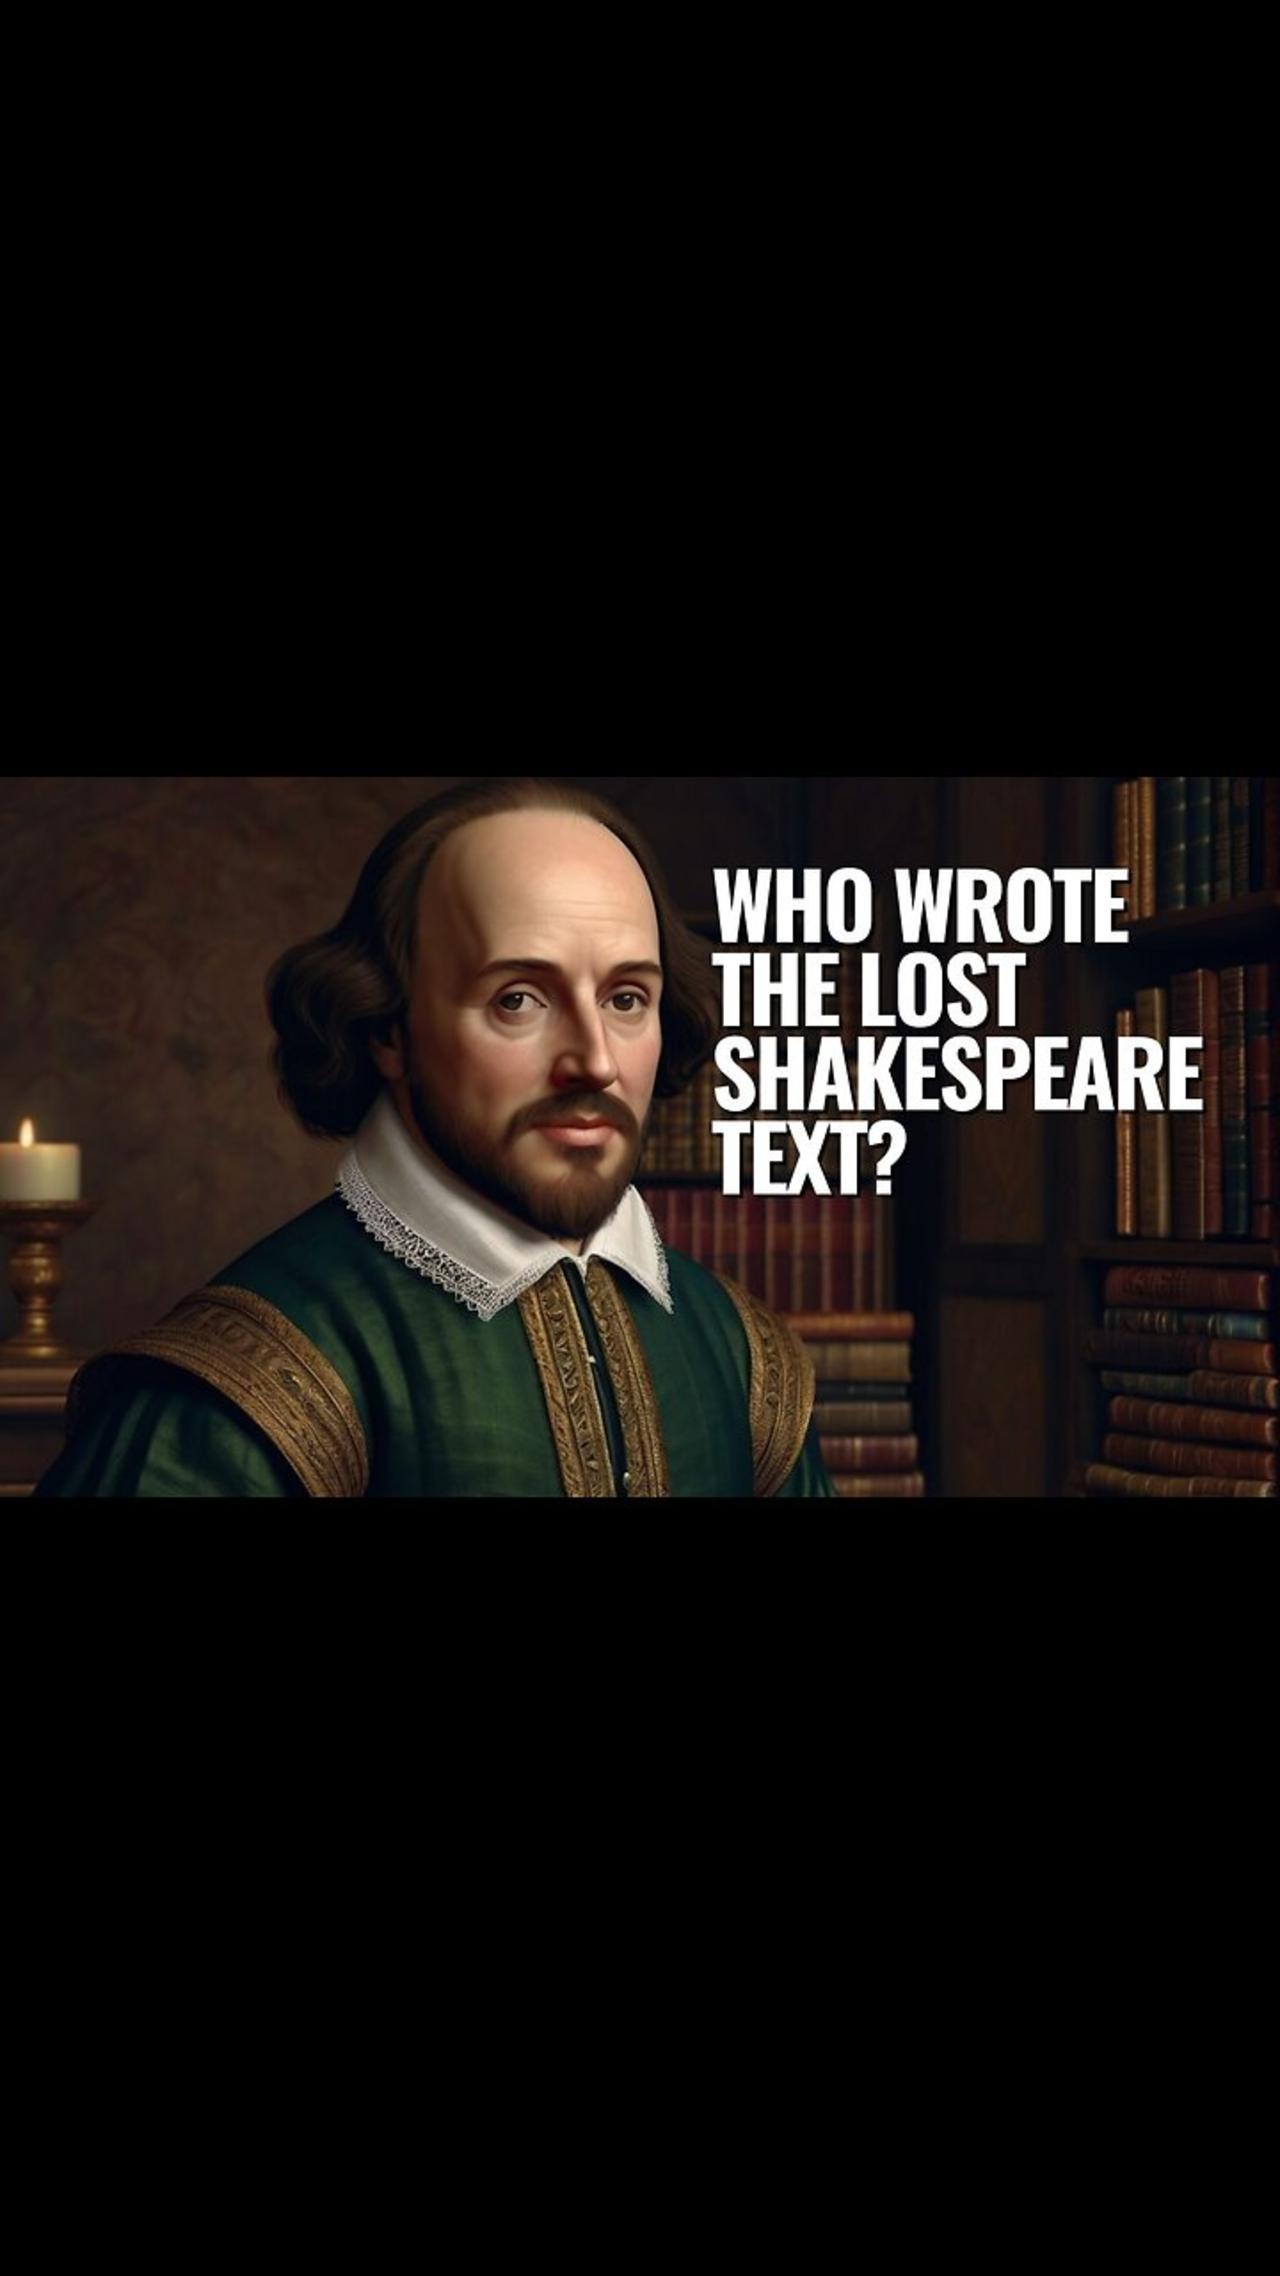 Who Wrote the Lost Shakespeare Text?